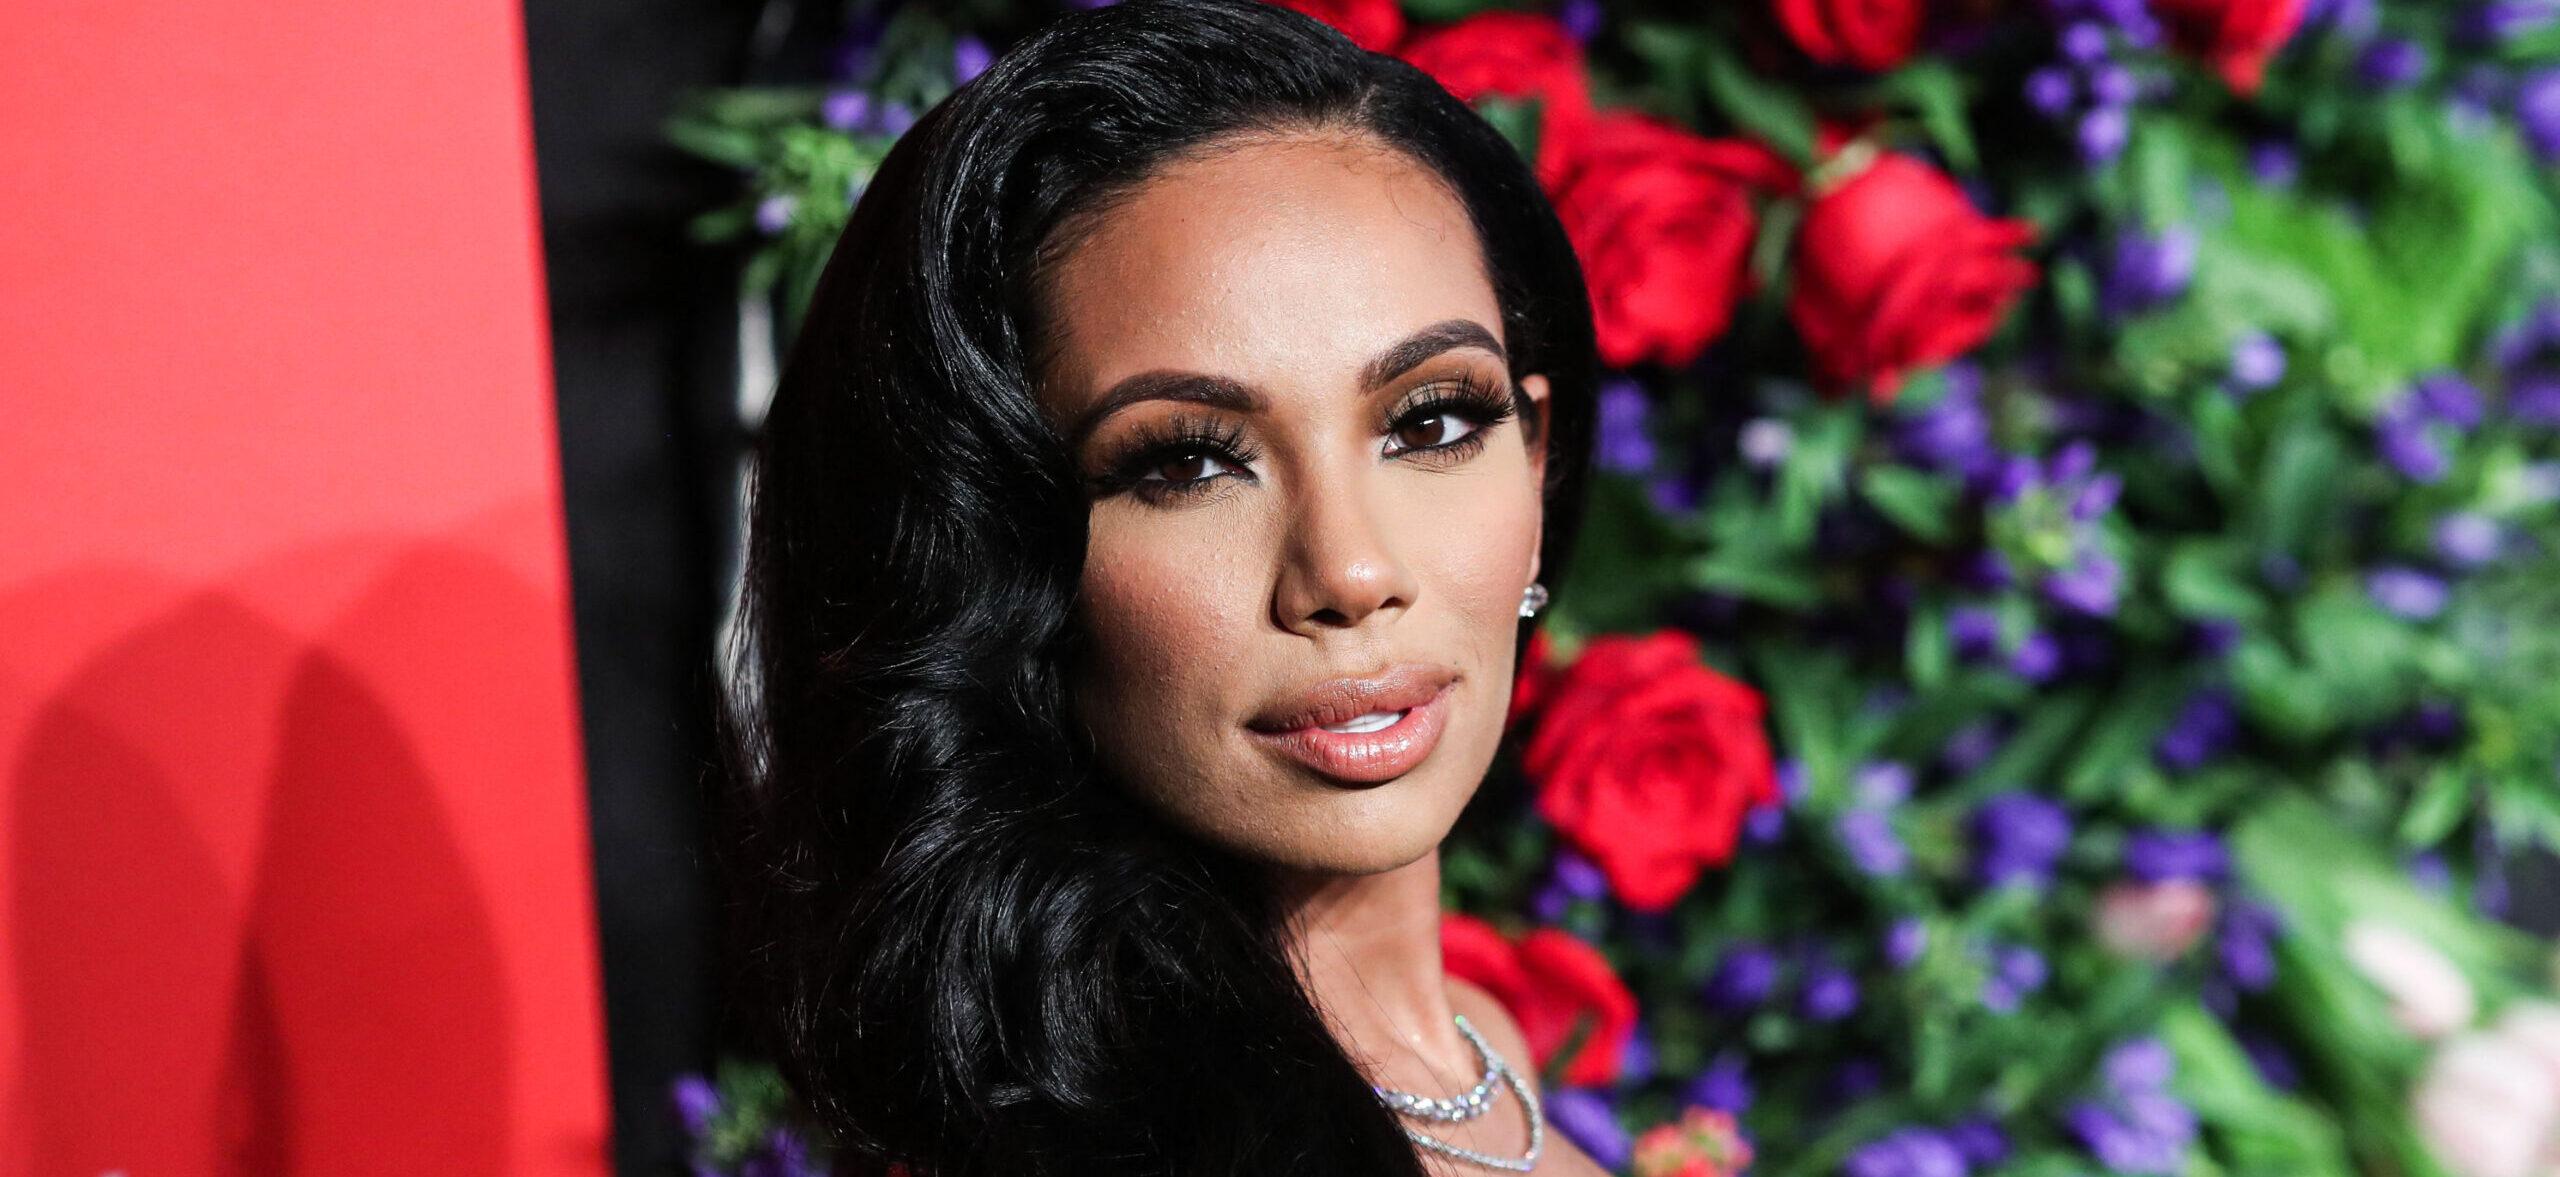 Erica Mena Says She ‘Regrets’ Calling Co-Star Spice A ‘Monkey’ On ‘Love And Hip-Hop’